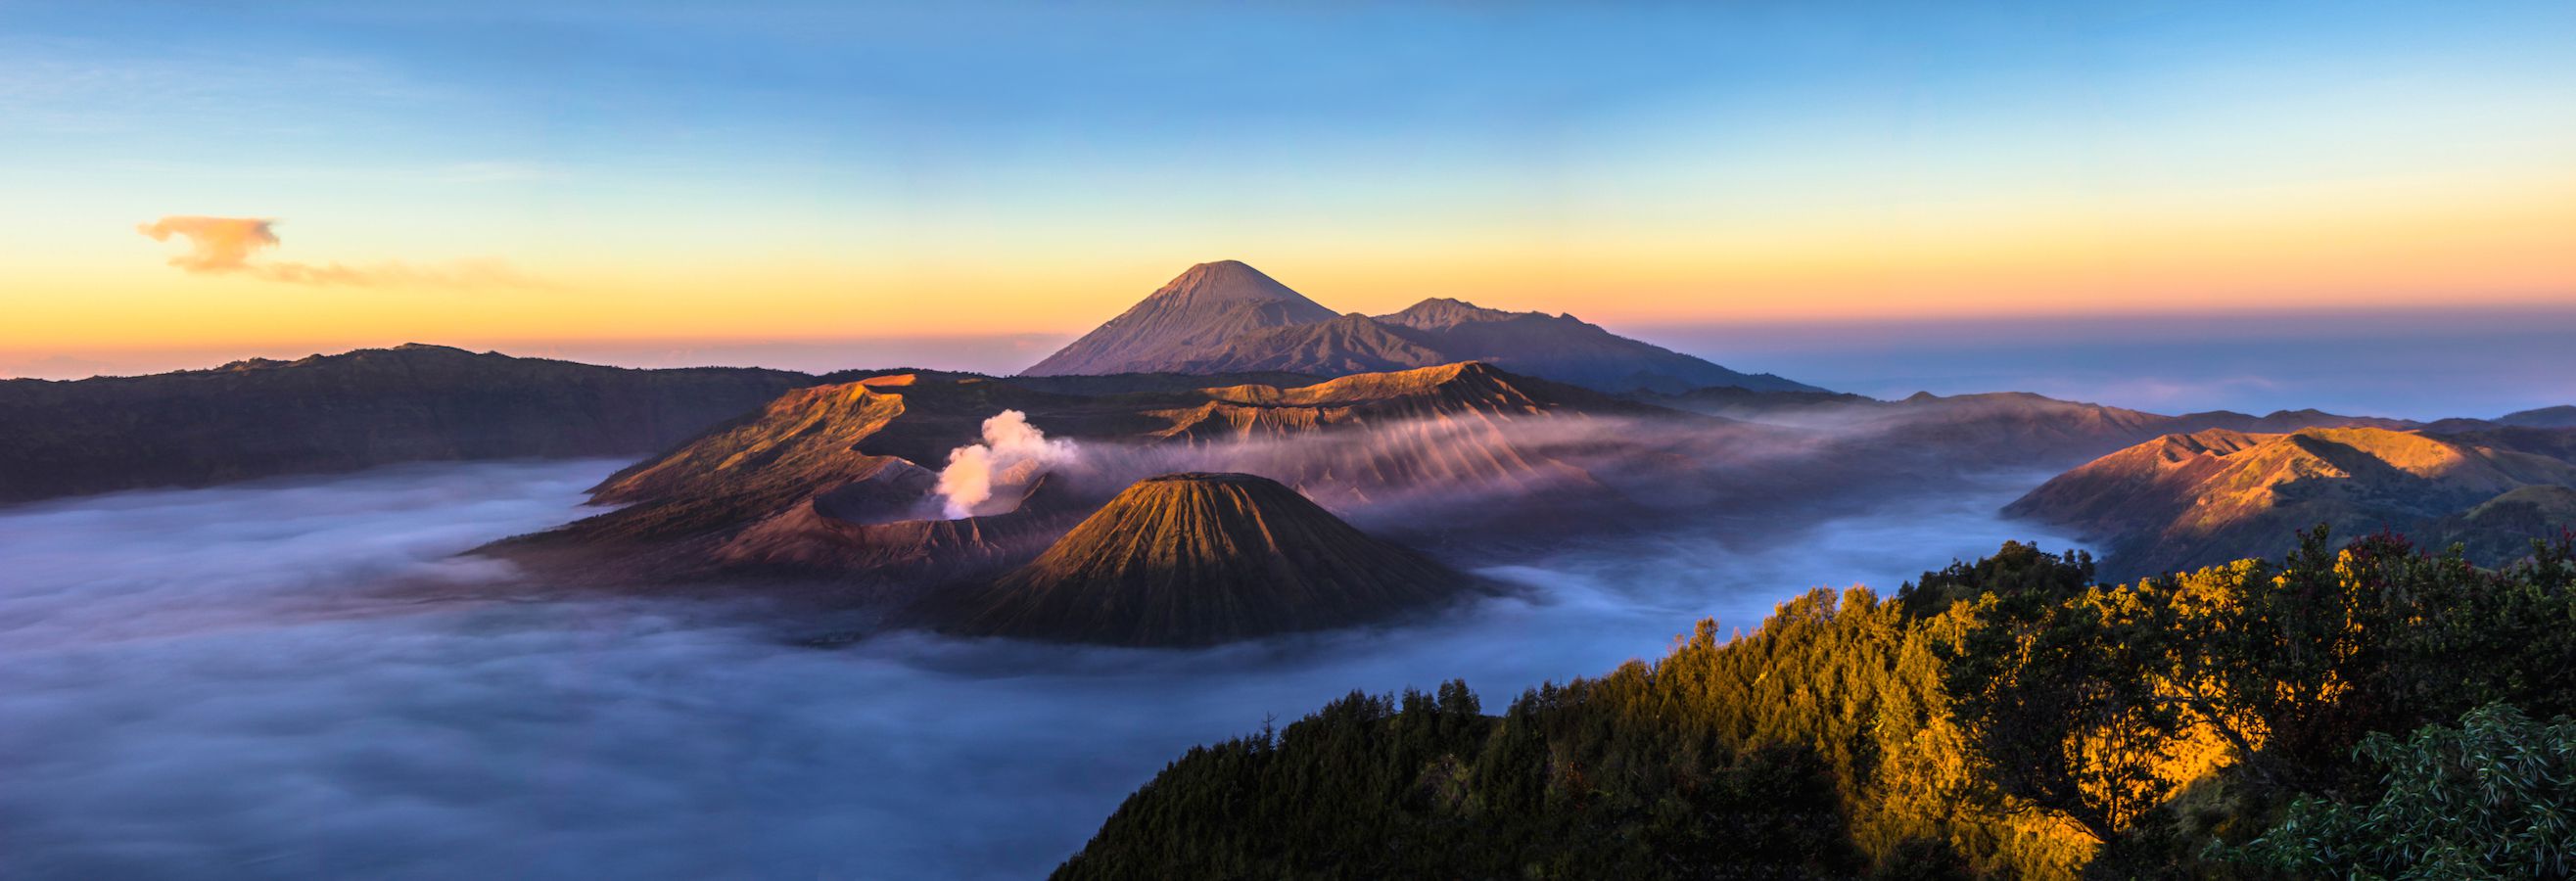 Panoramic view of the sunrise over Mt. Bromo, Indonesia